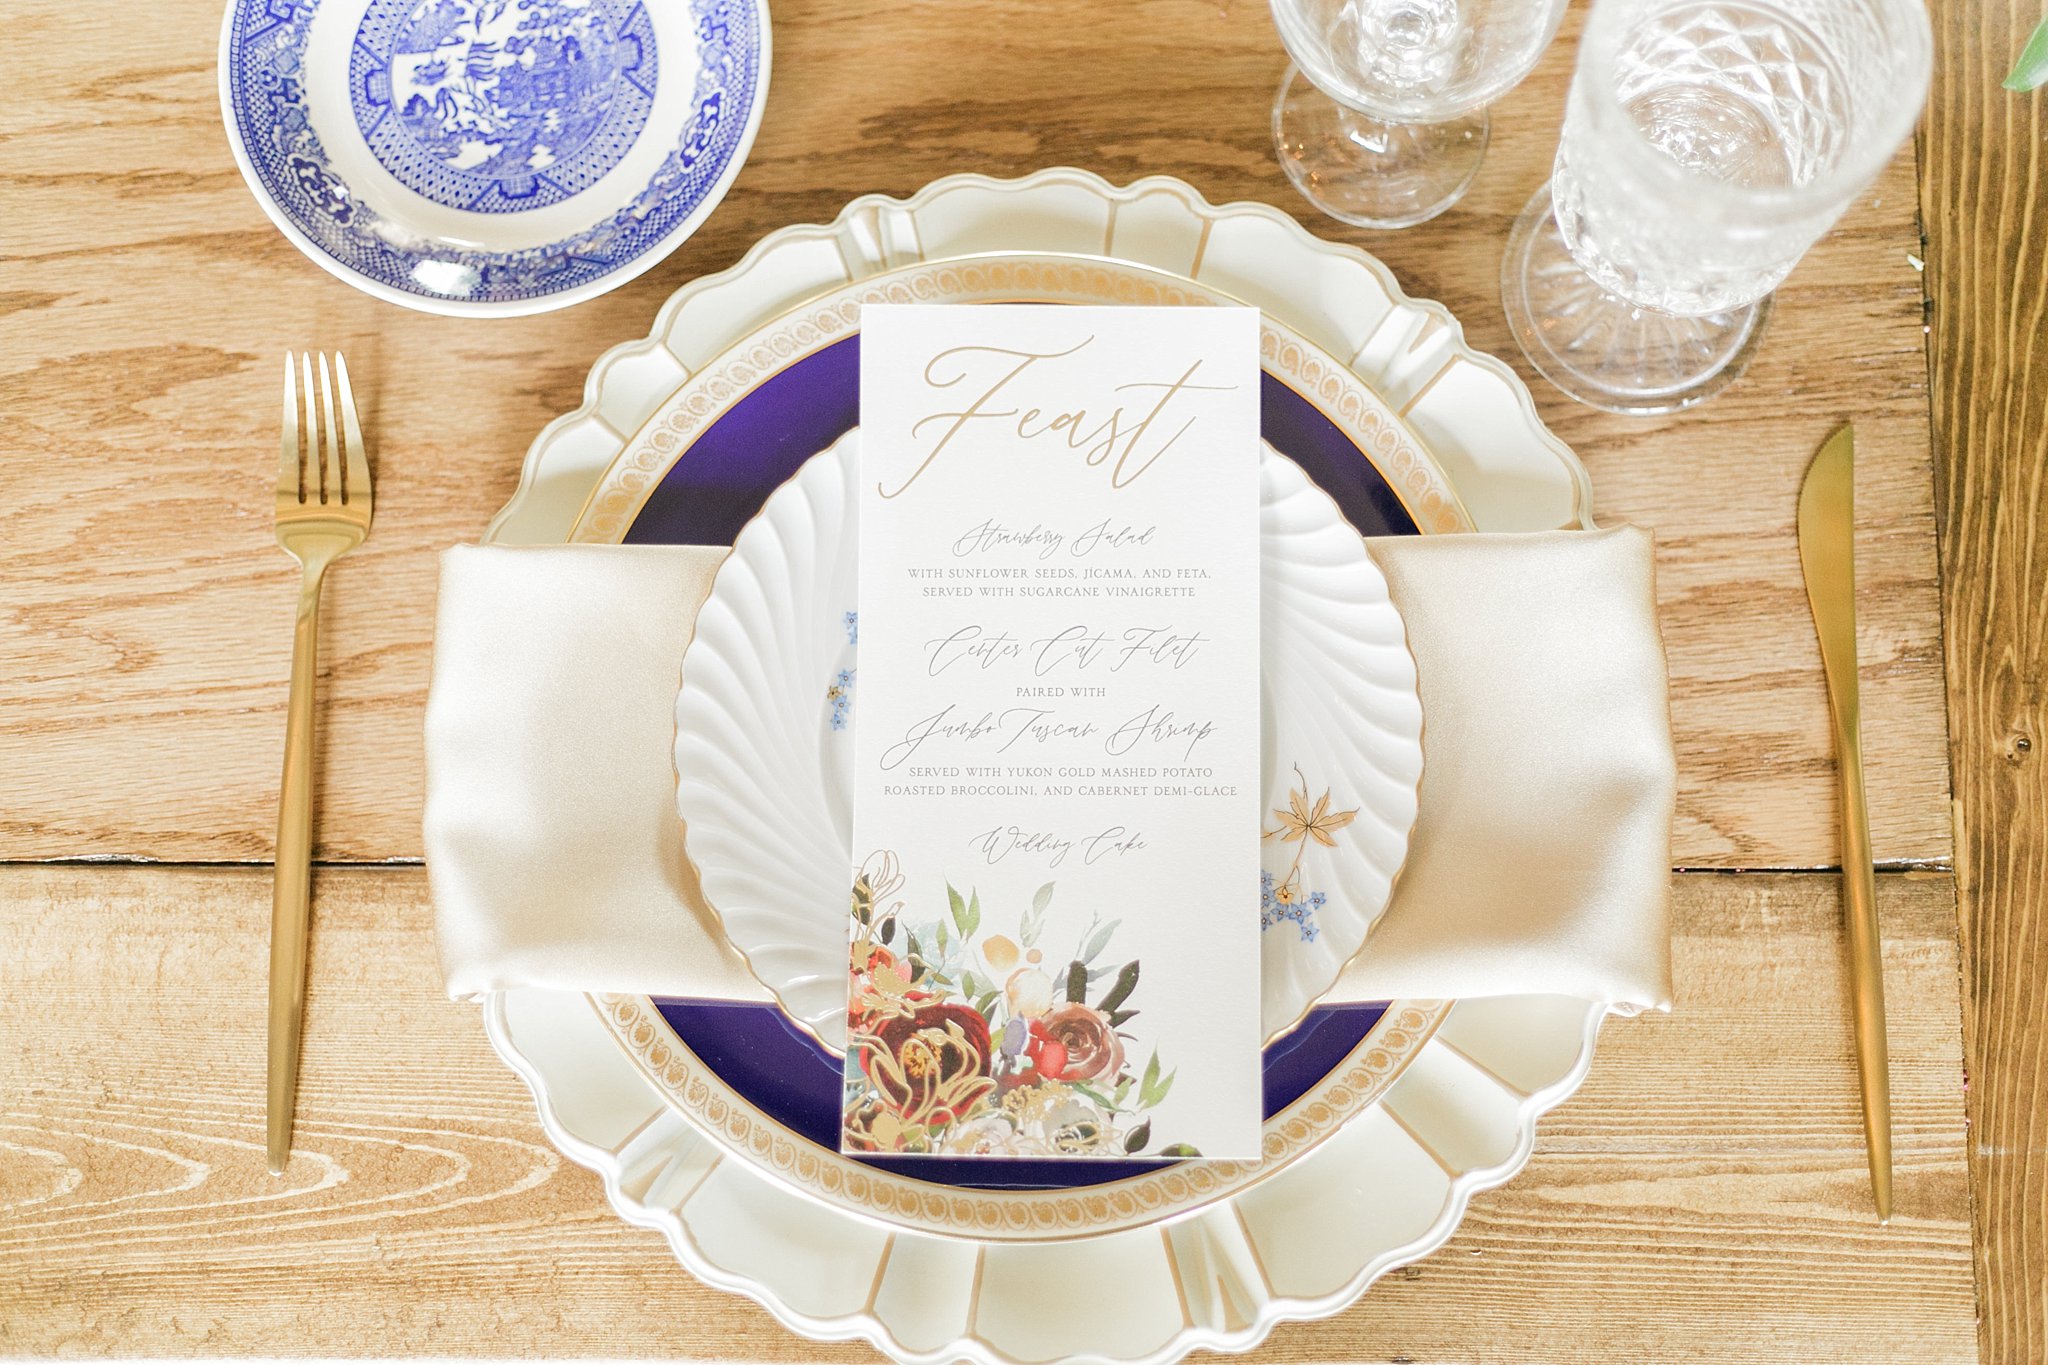 Vintage place setting for wedding reception.